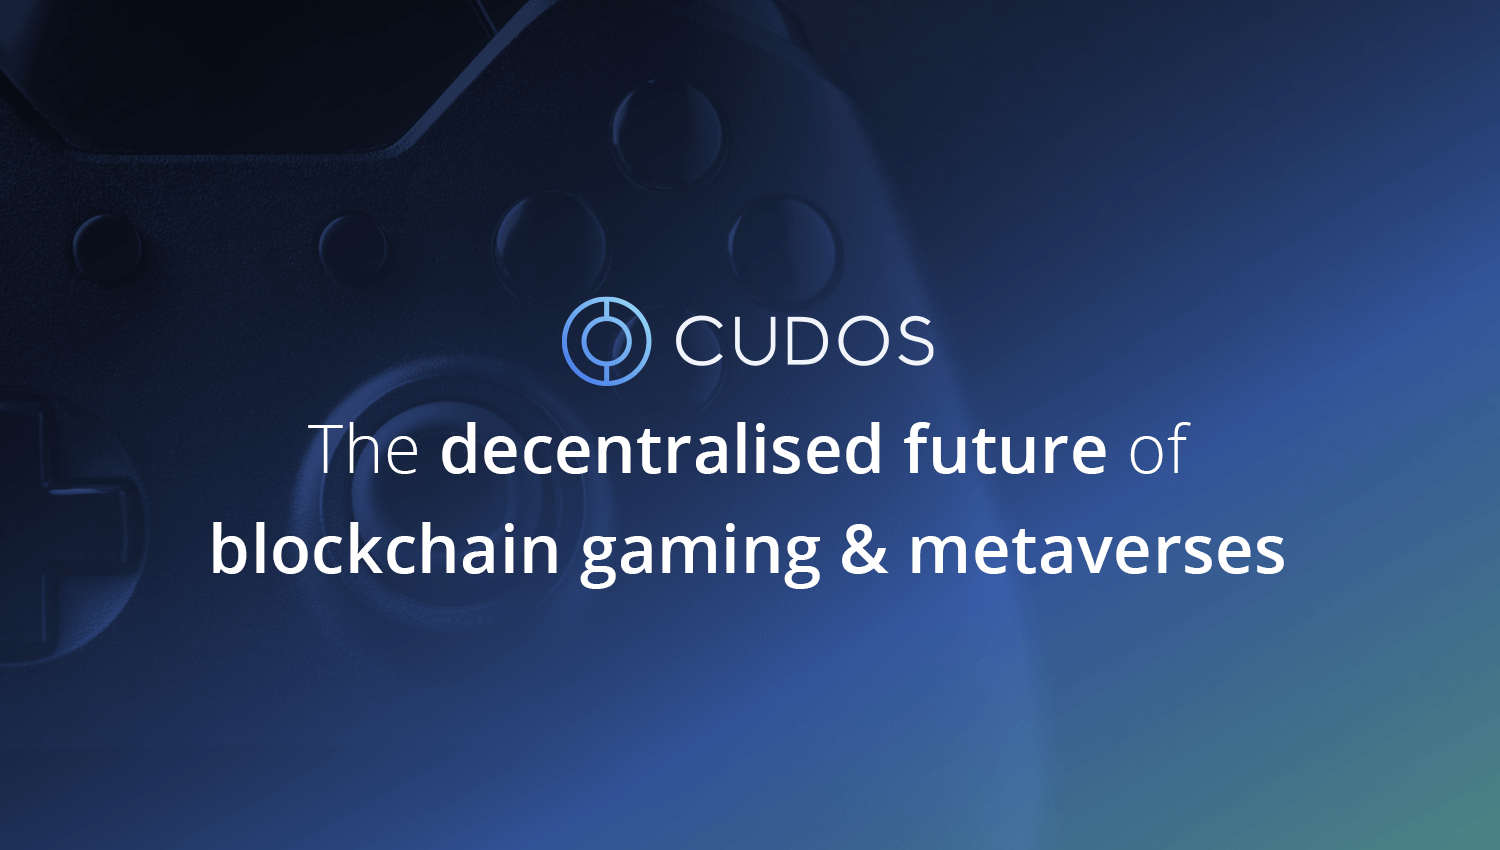 The decentralised future of blockchain gaming and metaverses